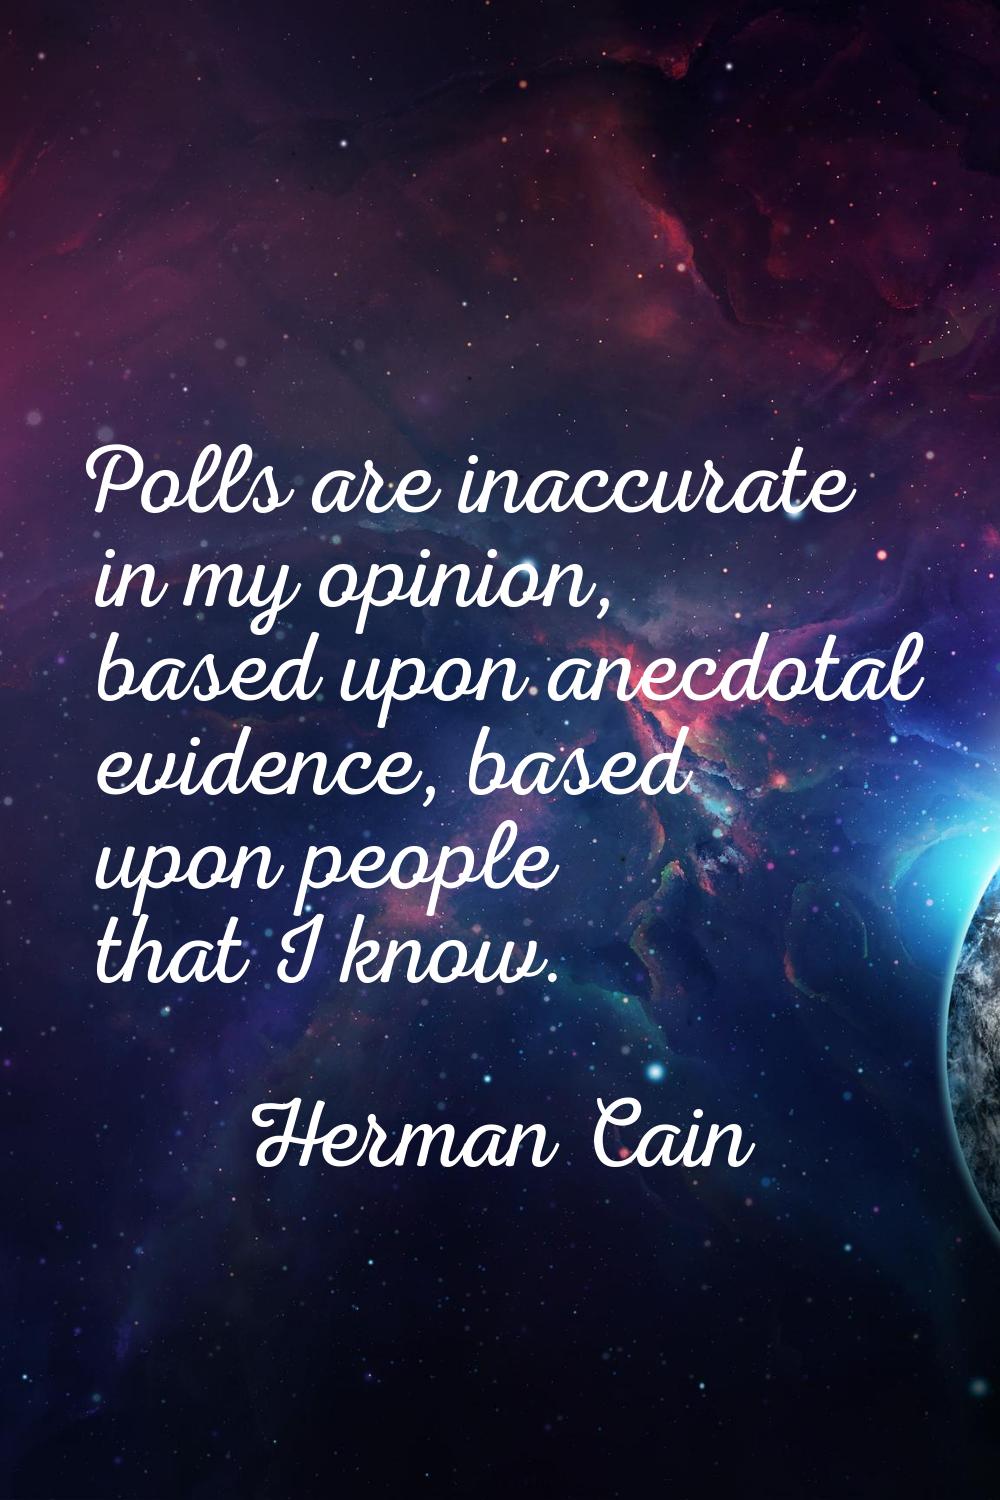 Polls are inaccurate in my opinion, based upon anecdotal evidence, based upon people that I know.